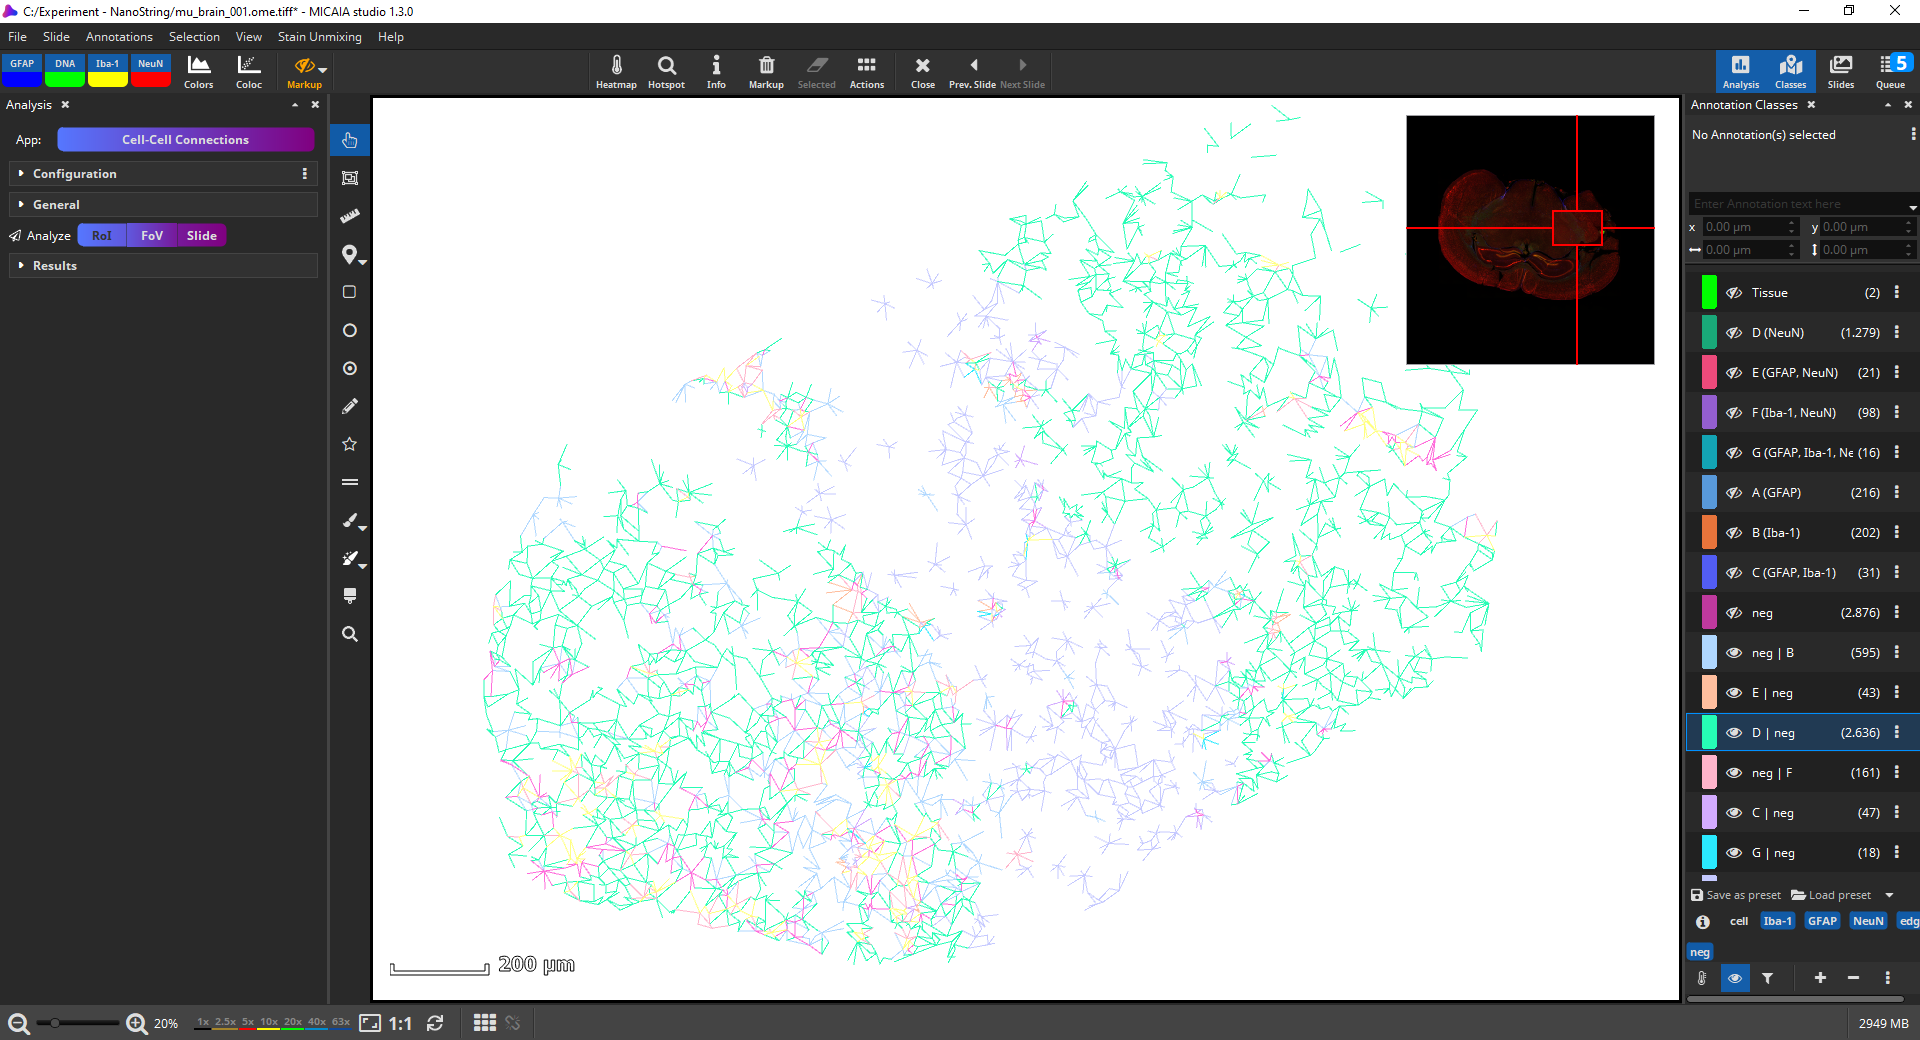 FL Colocalization App analysis result: cell-cell interactions